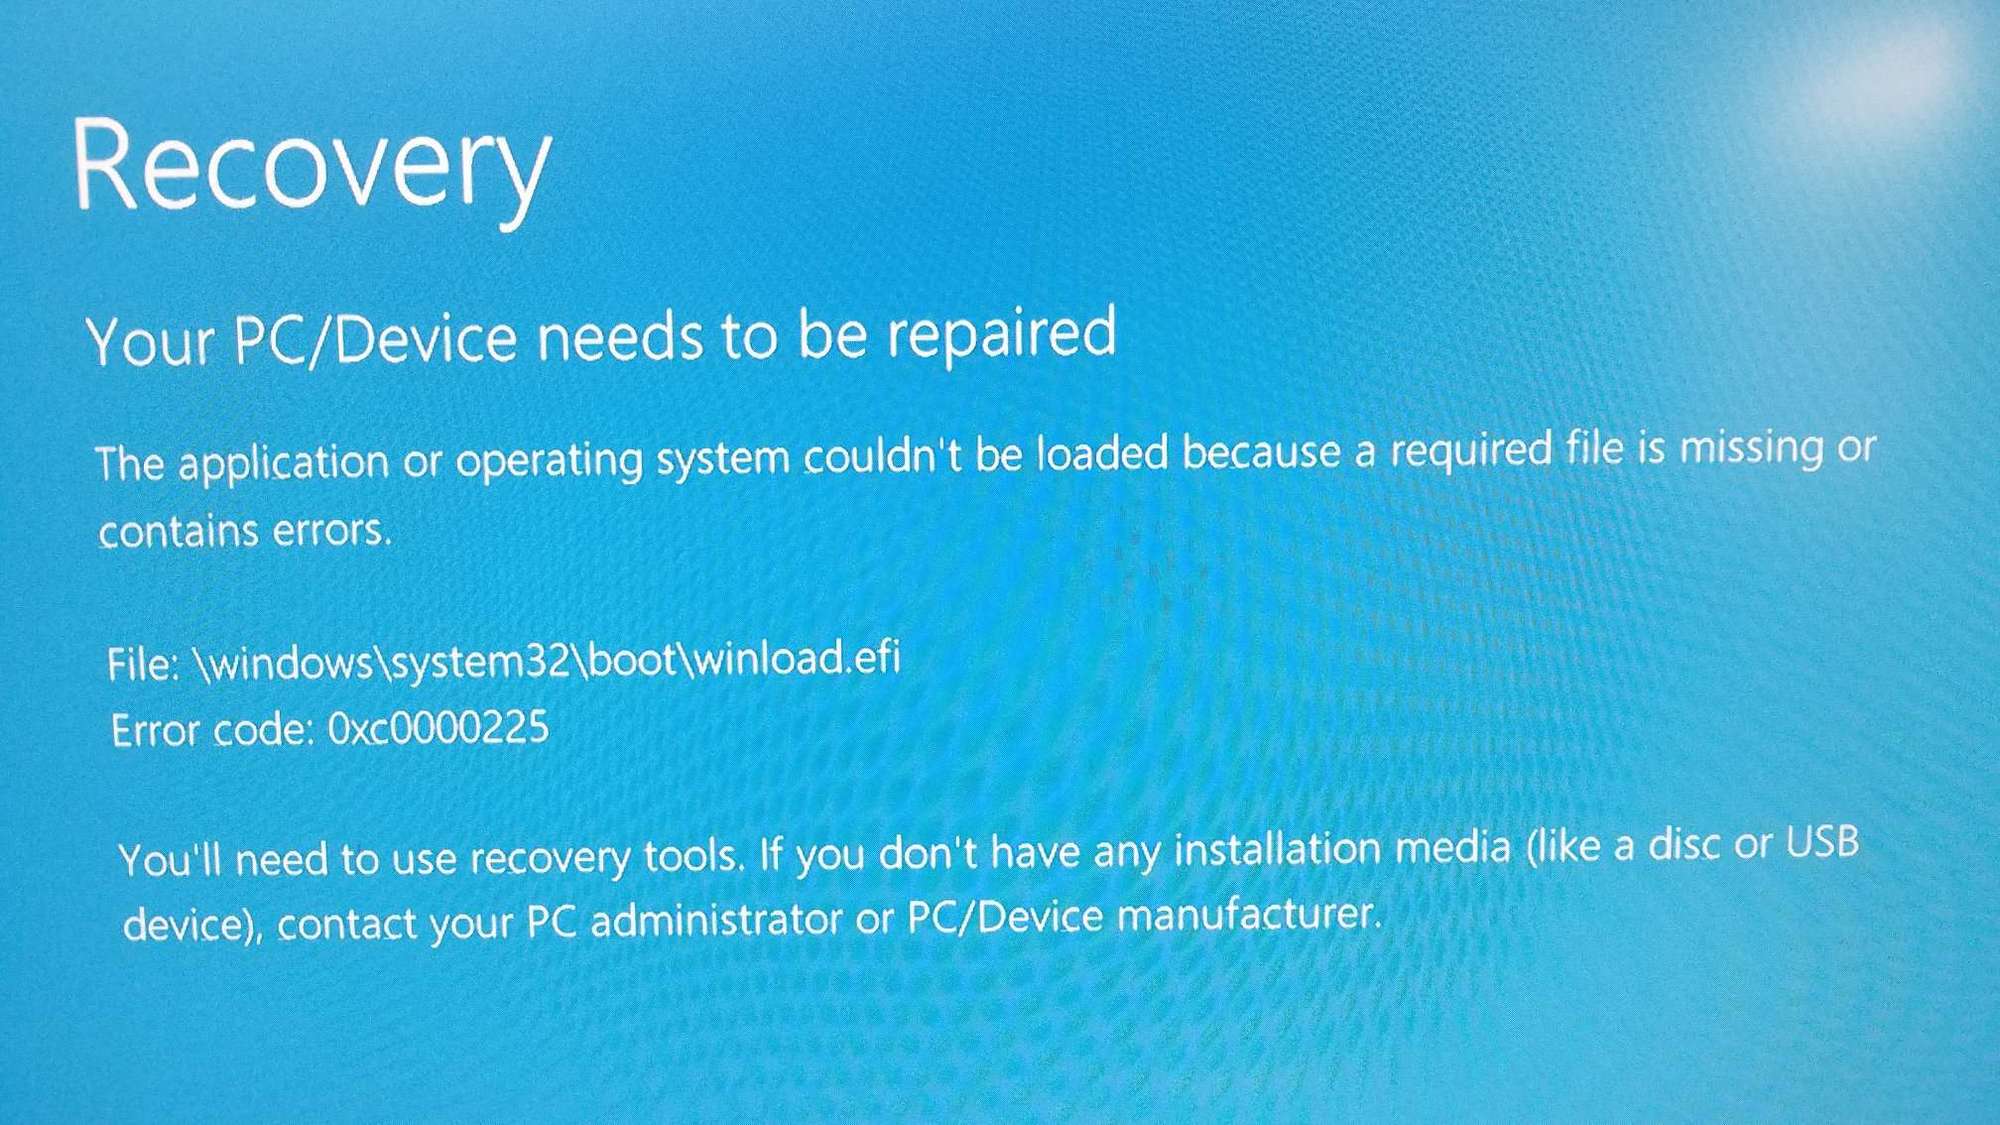 Need help with Windows 10 System Image Backup / Recovery / Repair 27905a7d-d29d-4052-922e-c16ad8673661?upload=true.jpg